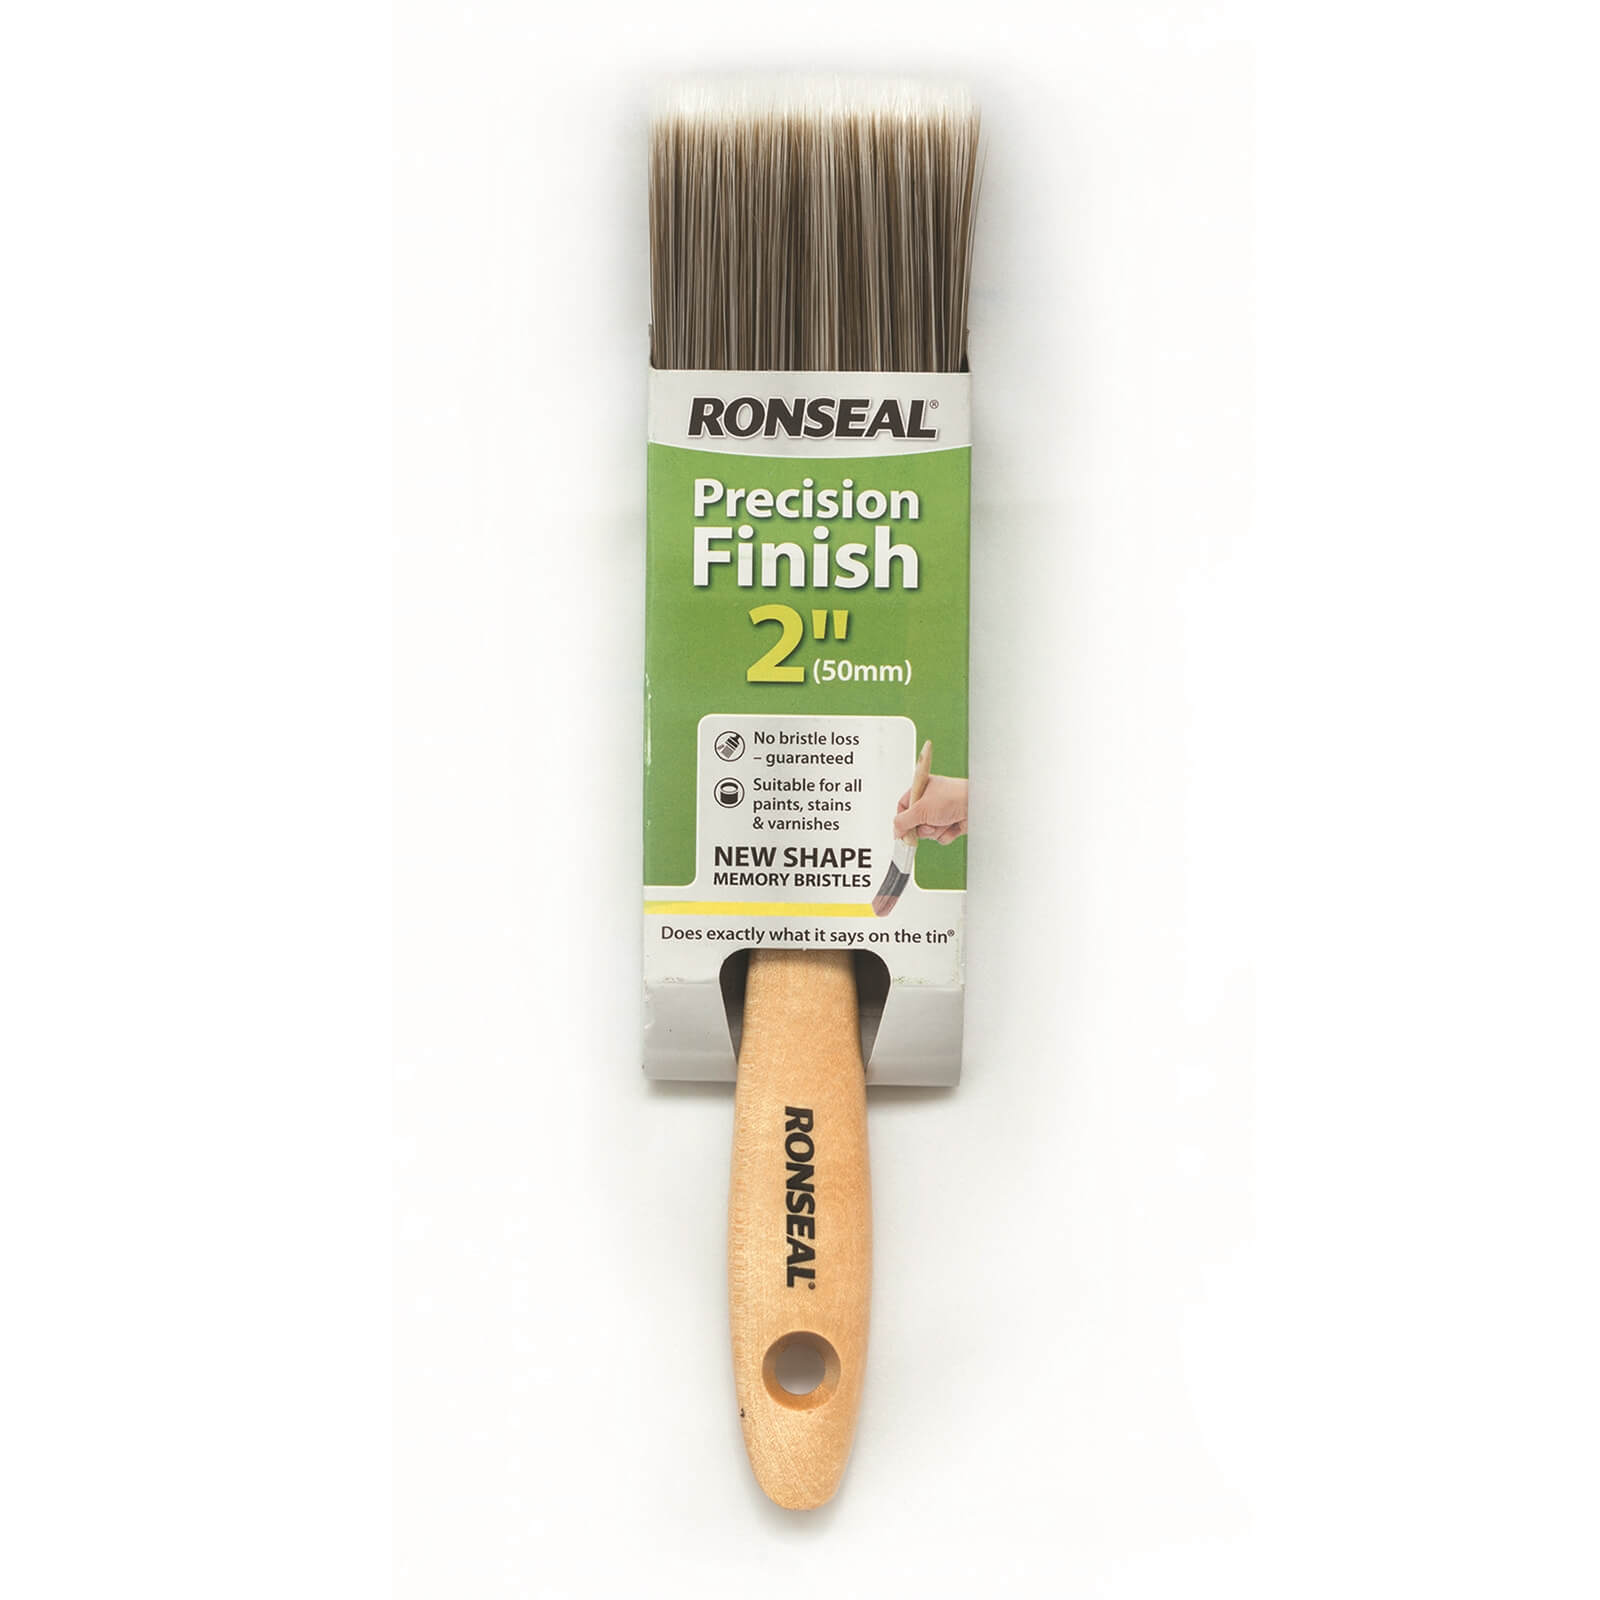 Ronseal Precision Finish Brush - 2in